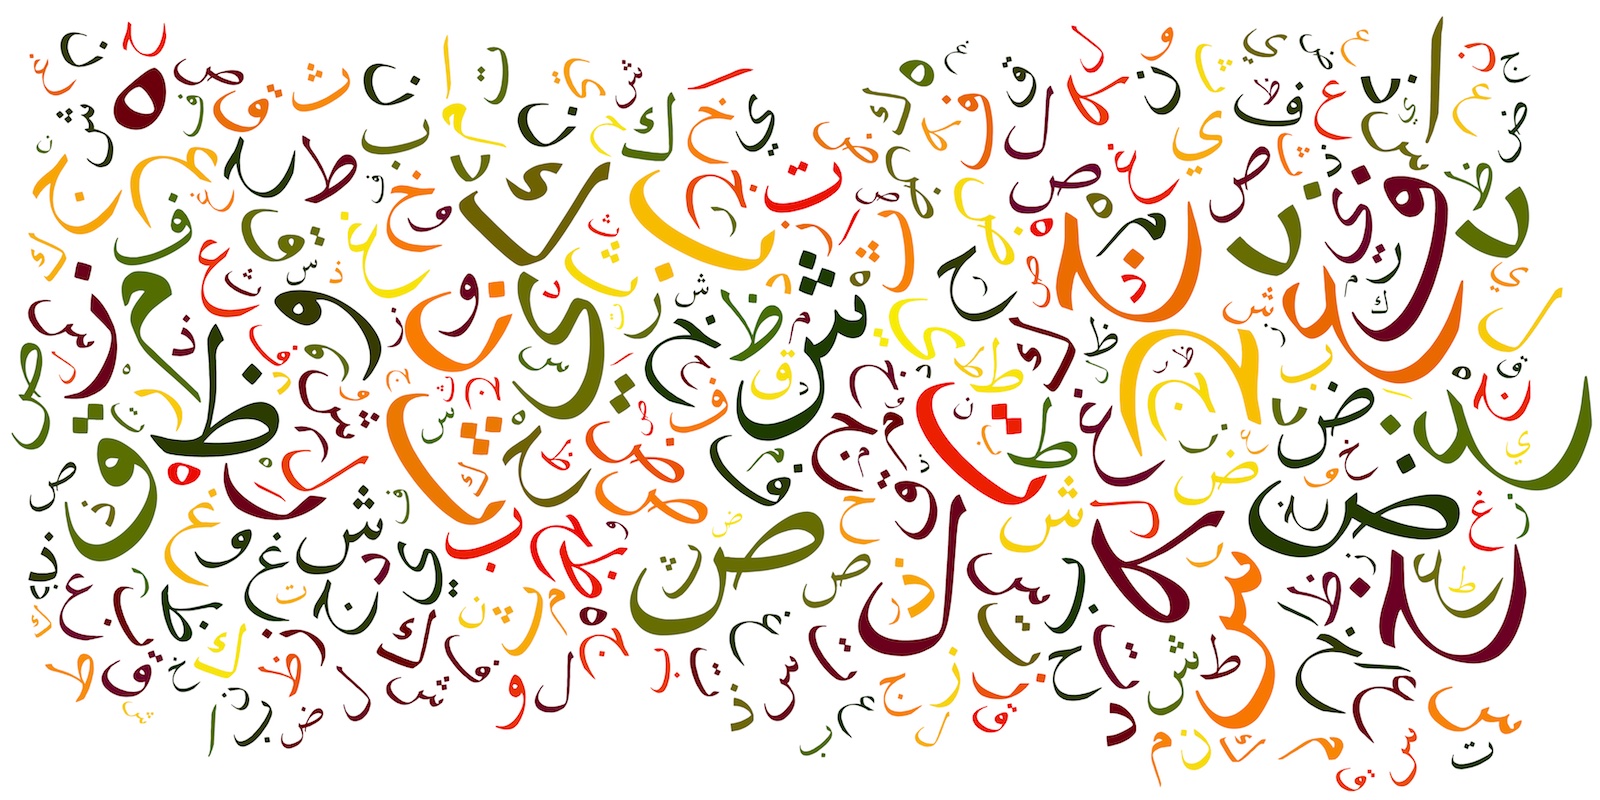 Get Access to Hundreds of Urdu Background PNG Images for Your Creative Projects